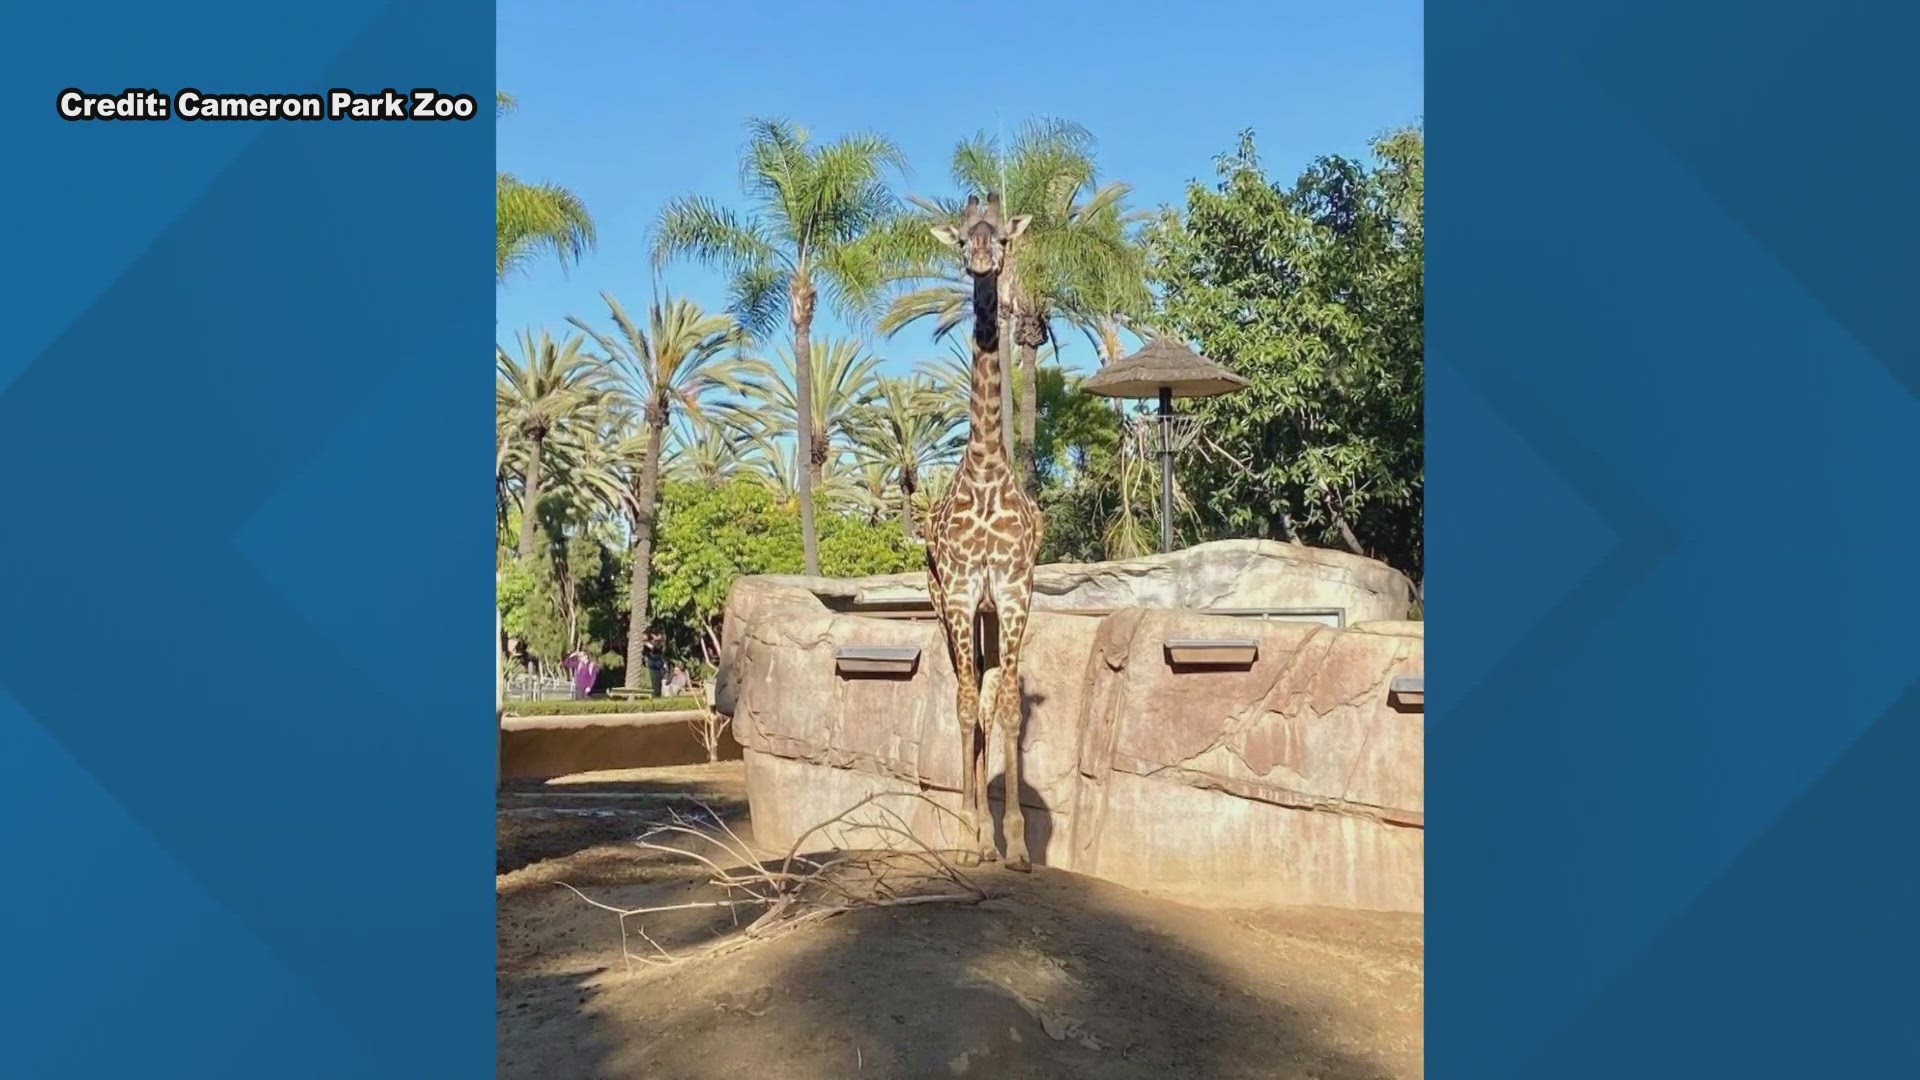 The zoo says that Eleanor will be quarantined for at least 30 days before being introduced to Dane and Jenny, the other giraffes also residing there.